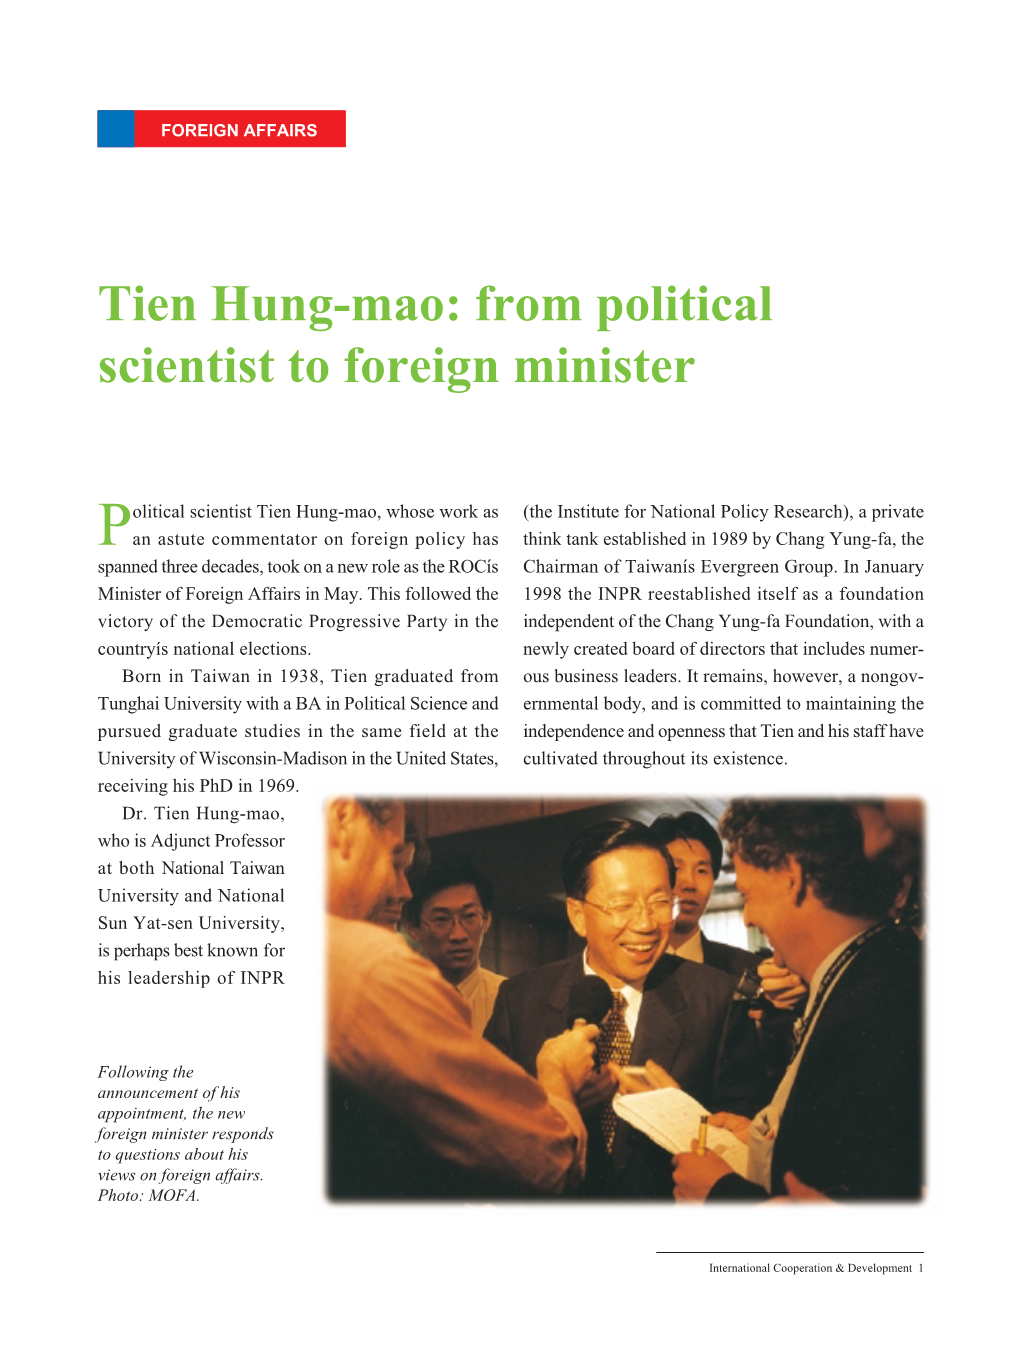 Tien Hung-Mao: from Political Scientist to Foreign Minister